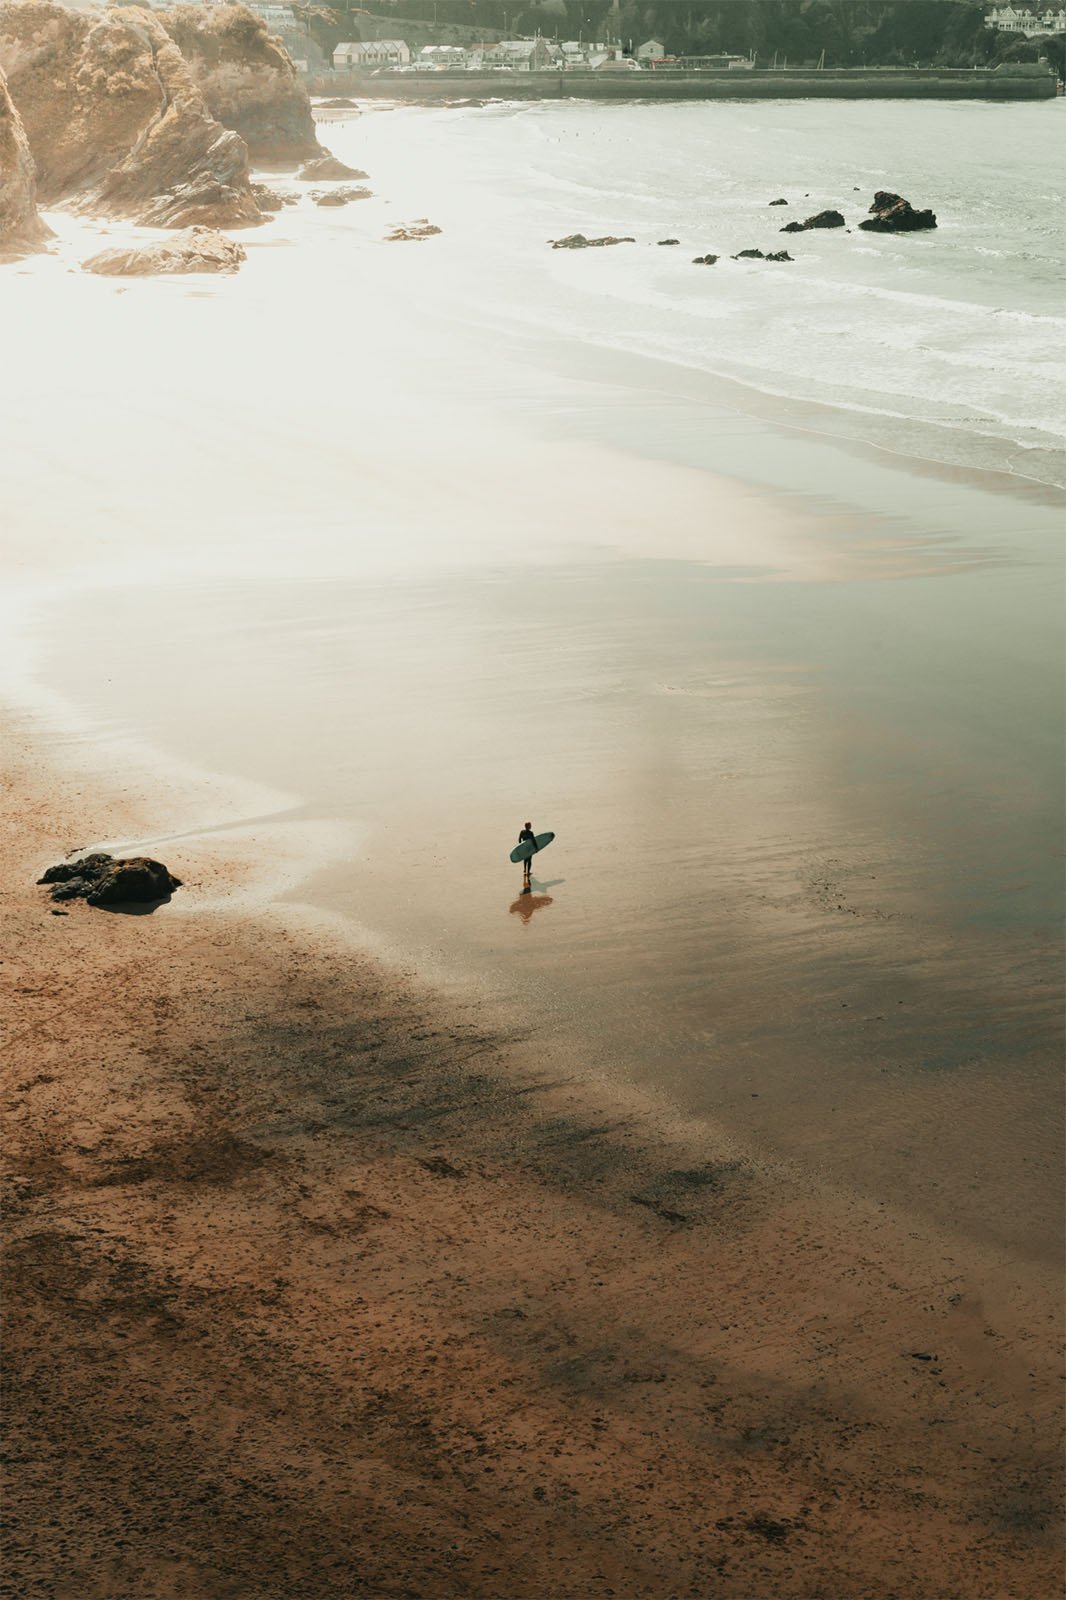 A lone surfer walks along a sunlit beach towards the water, with large rocks scattered along the shoreline, under a soft golden haze.